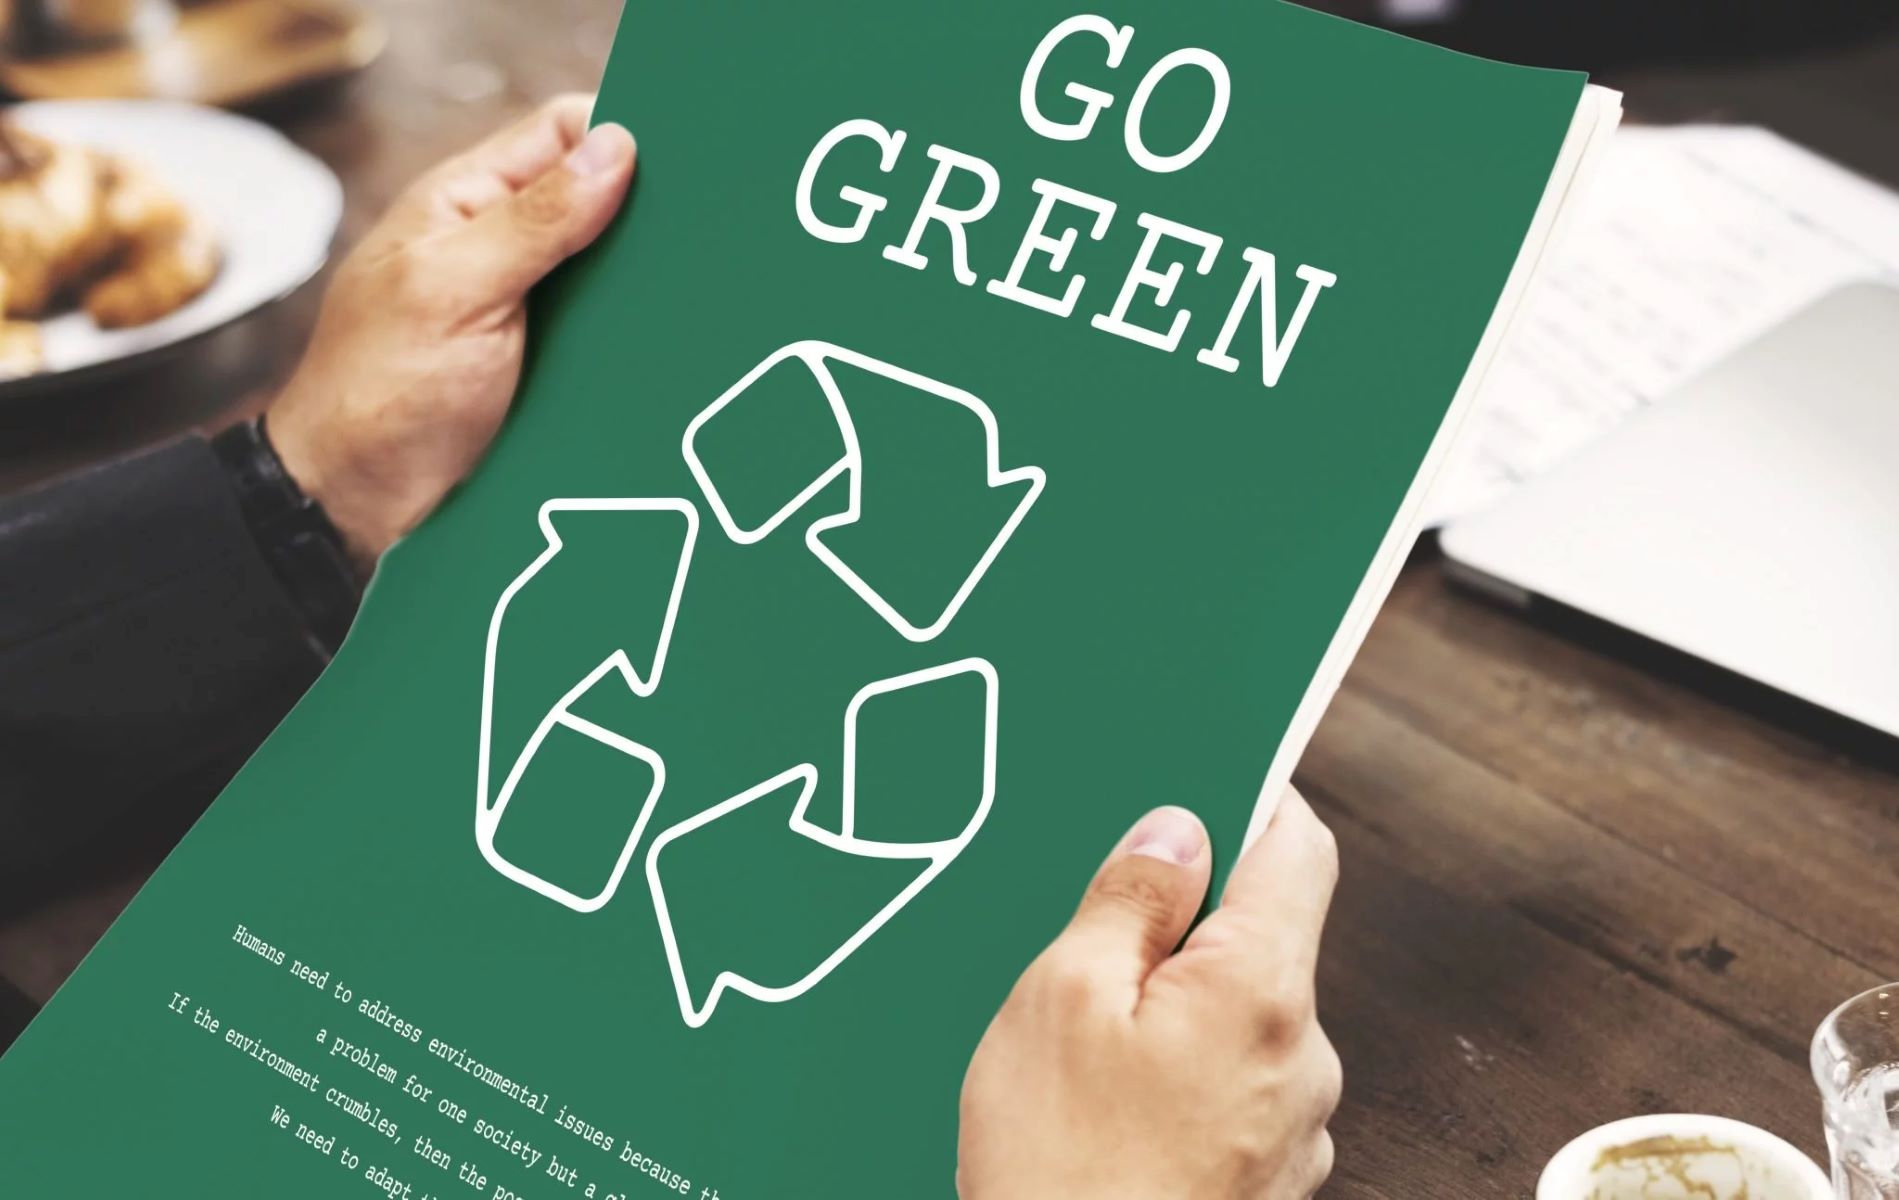 The Ultimate Challenge For Businesses Going Green